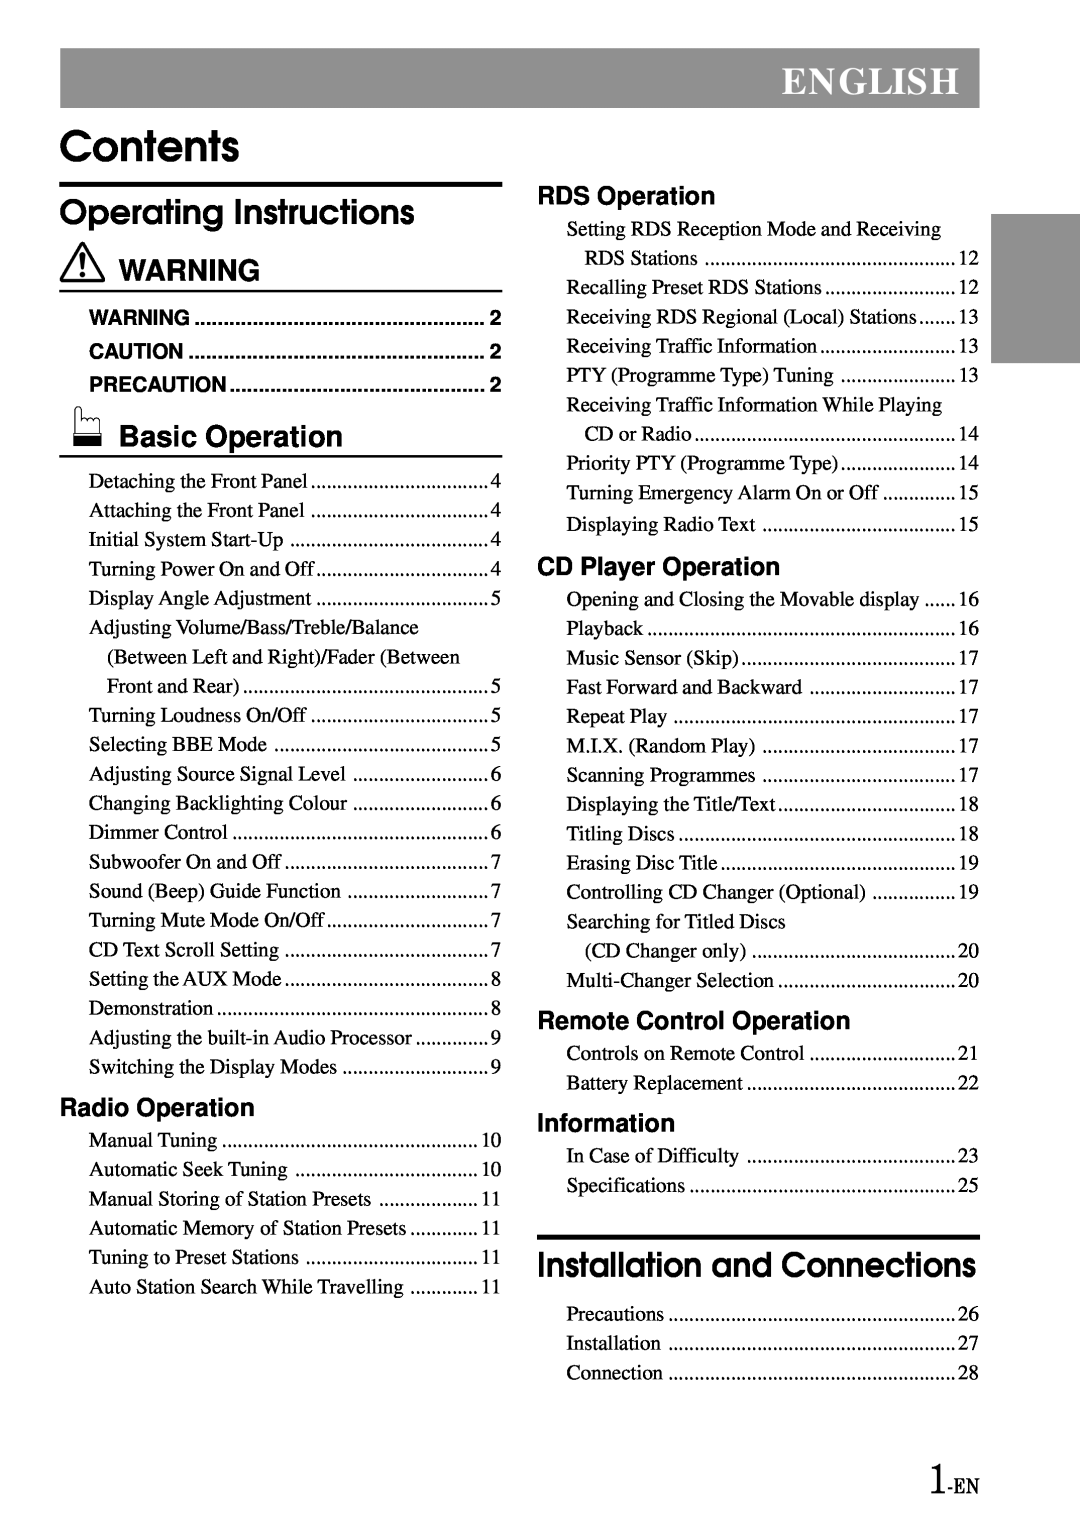 Alpine CDA-7865R Basic Operation, Contents, English, Operating Instructions, Installation and Connections, Radio Operation 